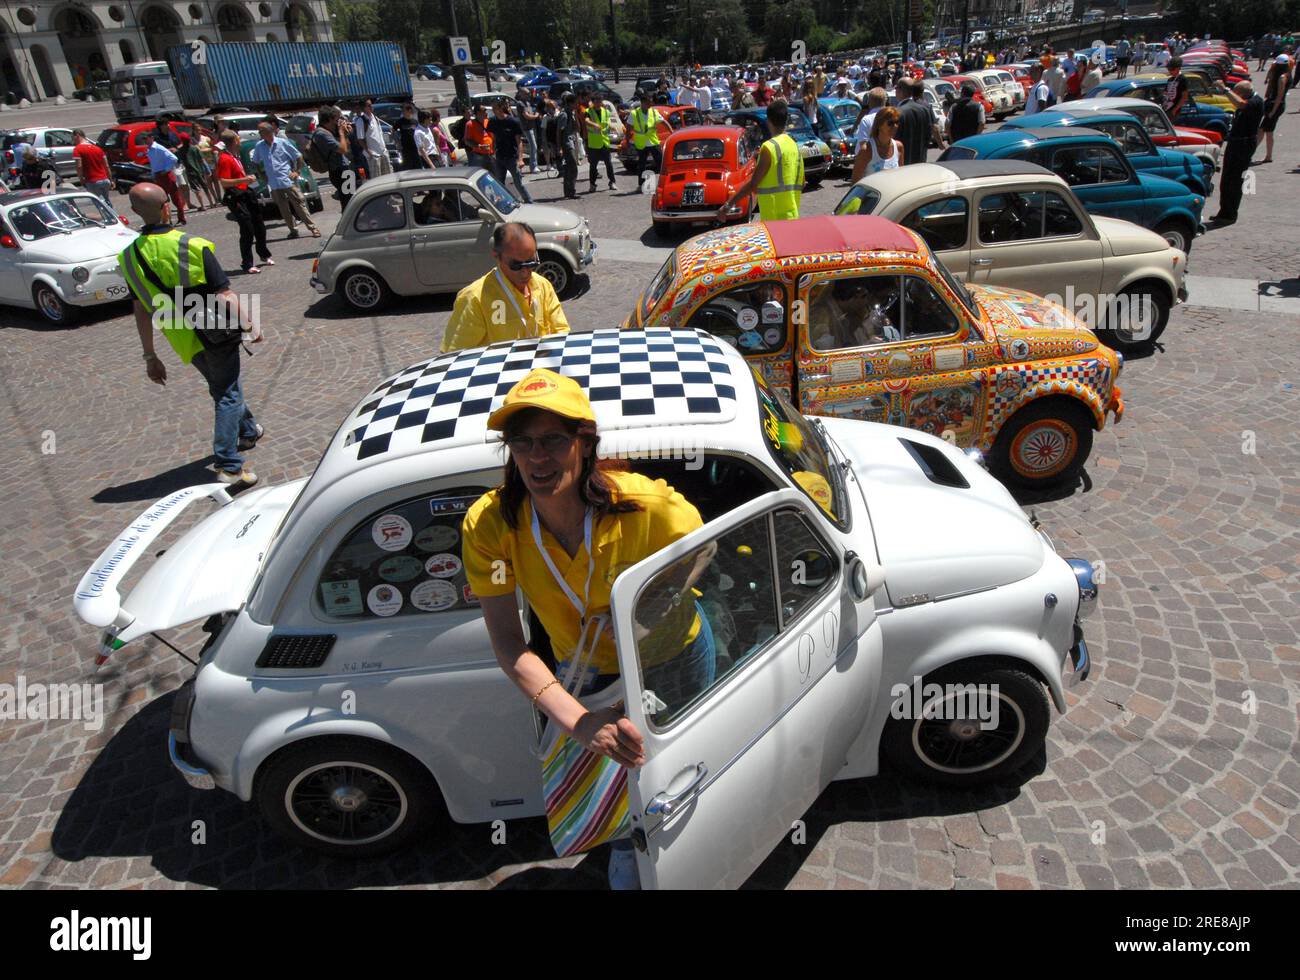 Torino, Italy - July 2007: International gathering in Turin for the launch event of the new Fiat 500. In 2007, the 50th anniversary of the Nuova 500's Stock Photo